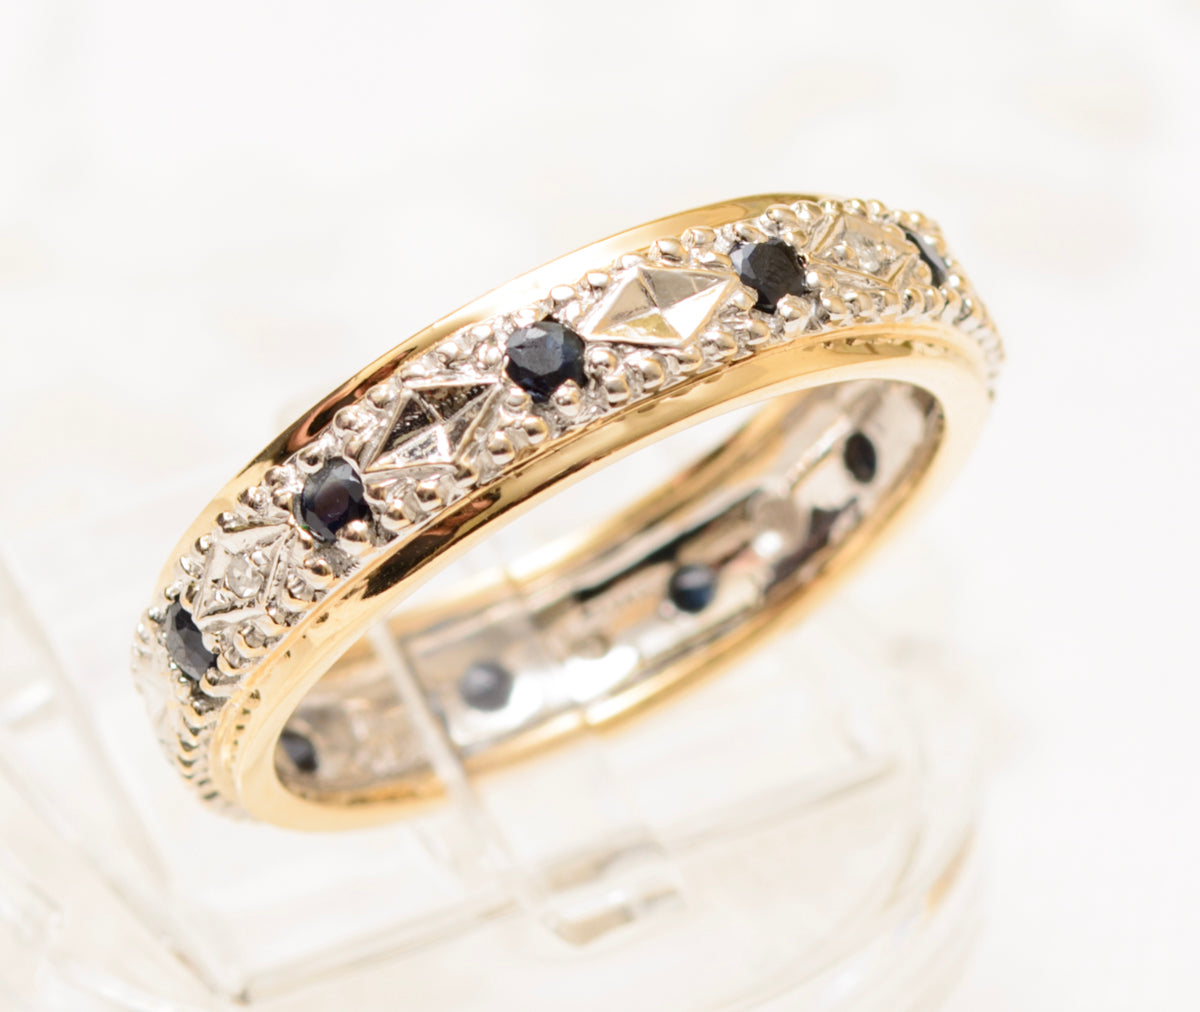 9ct Gold Full Eternity Ring With Natural Sapphires & Diamonds UK Size P (A1834)